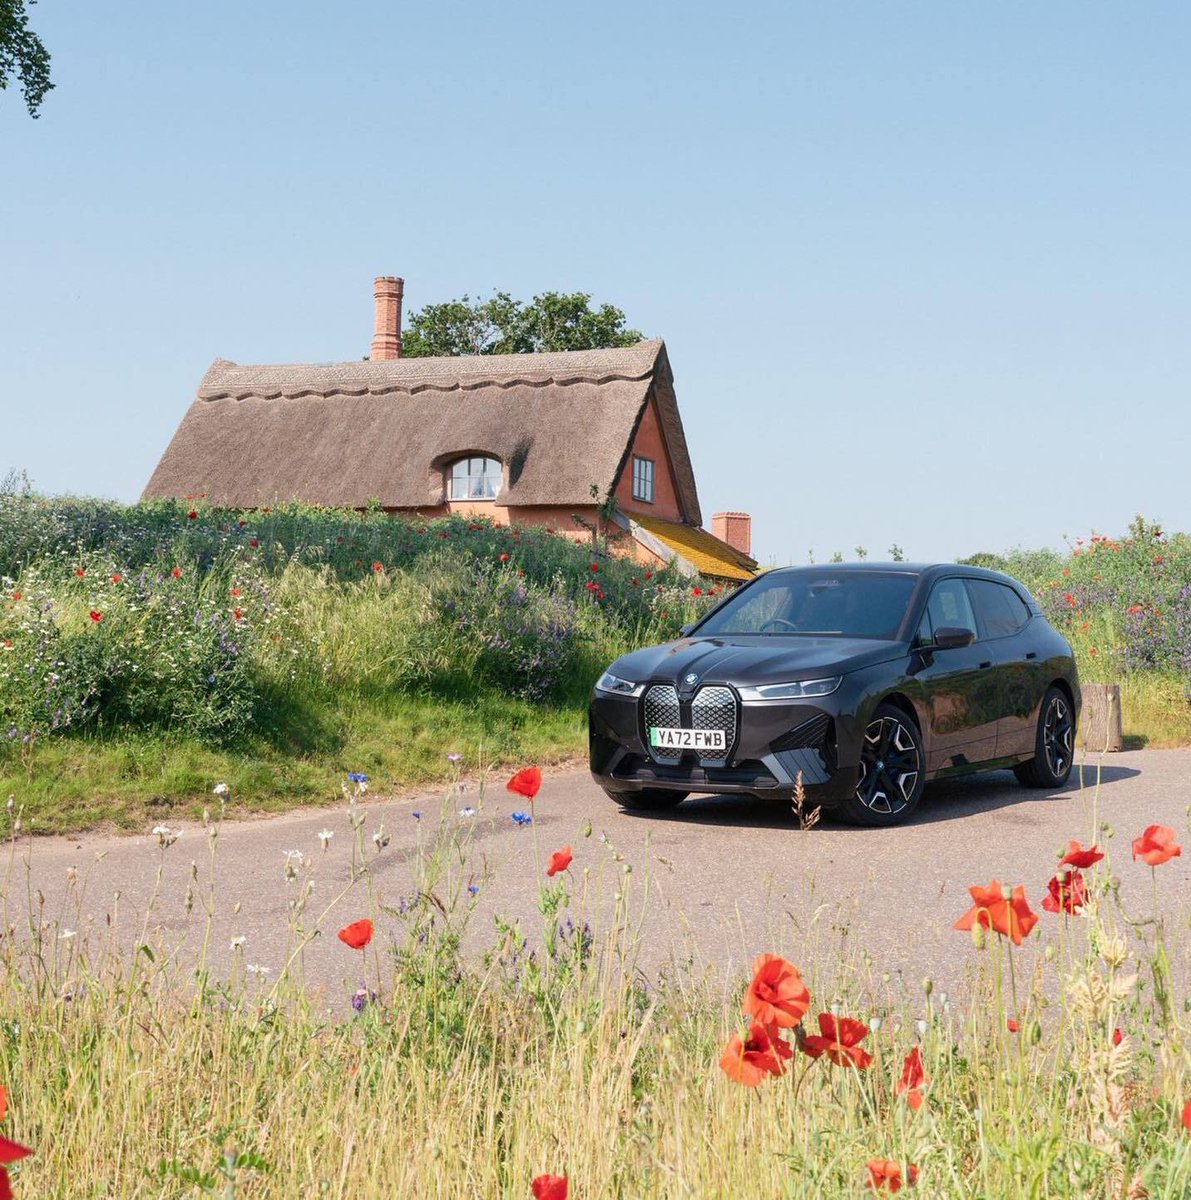 We've teamed up with @WildernessResUK for an exciting new partnership.

We're both committed to reducing our impact, so now every property at Wilderness Reserve comes with the use of an all-electric BMW to help guests explore rural Suffolk.

#BMWUK #BMWElectric